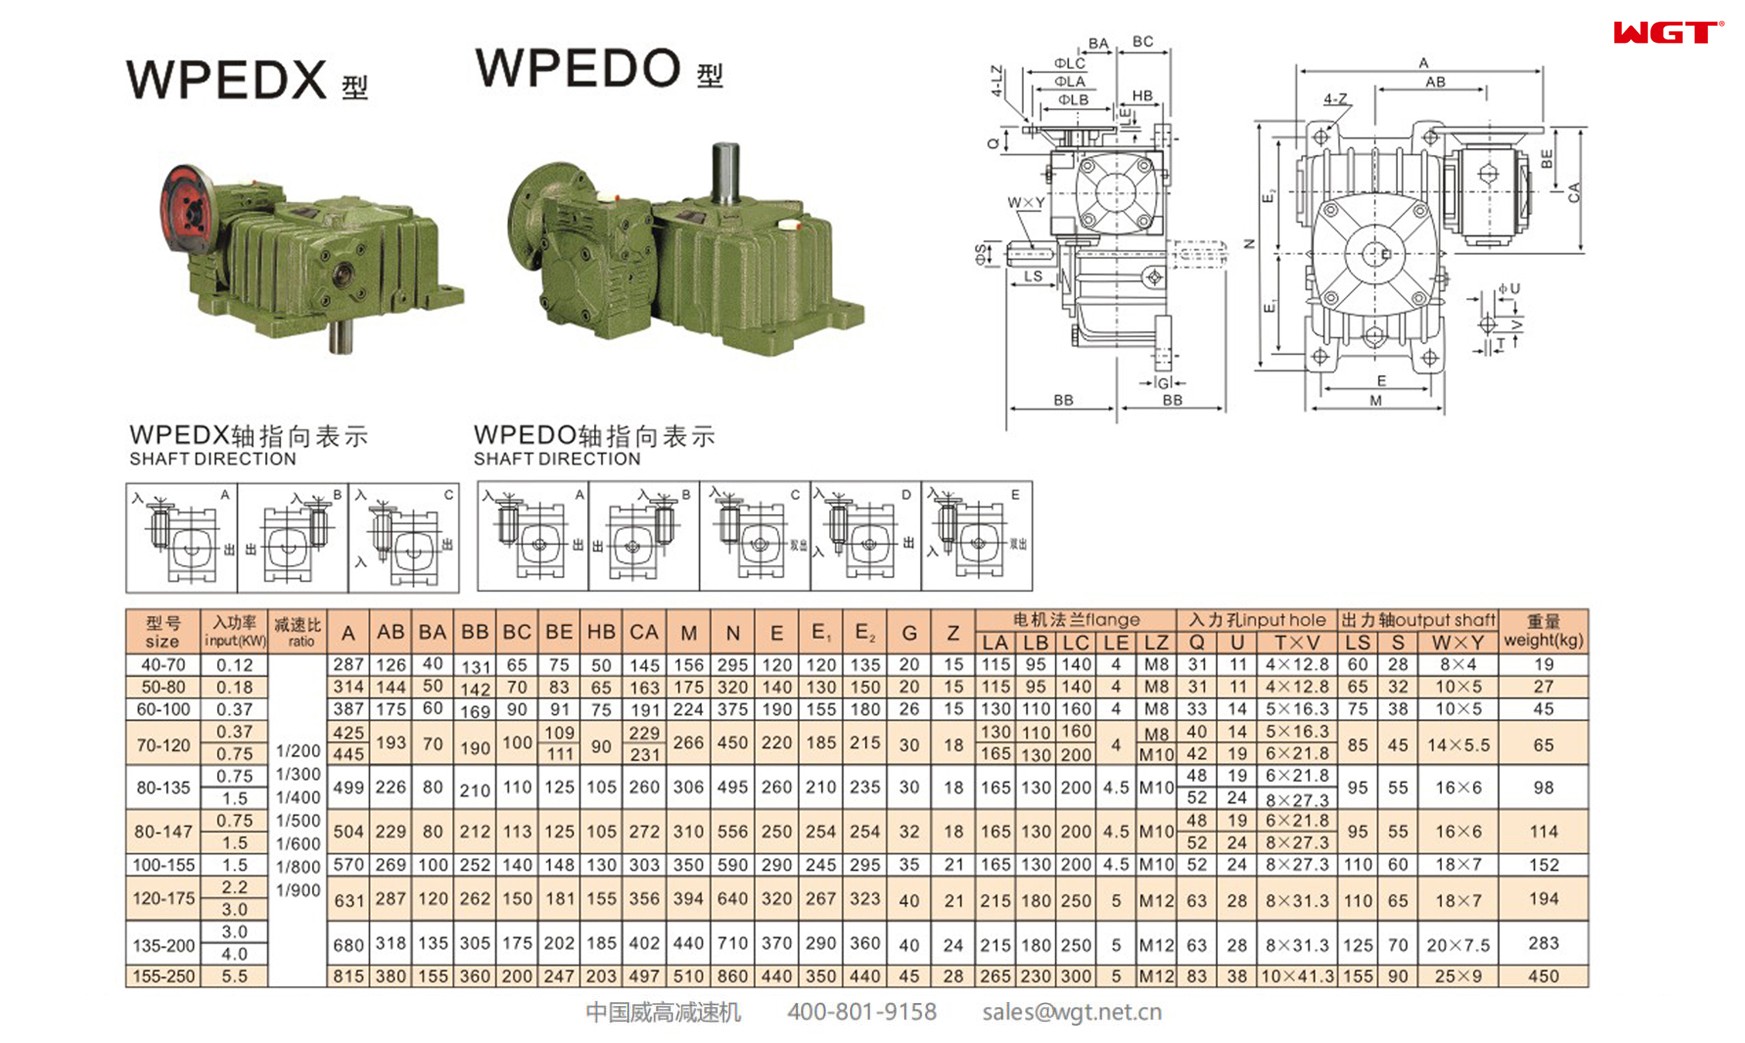 WPEDX120-175 worm gear reducer double speed reducer 